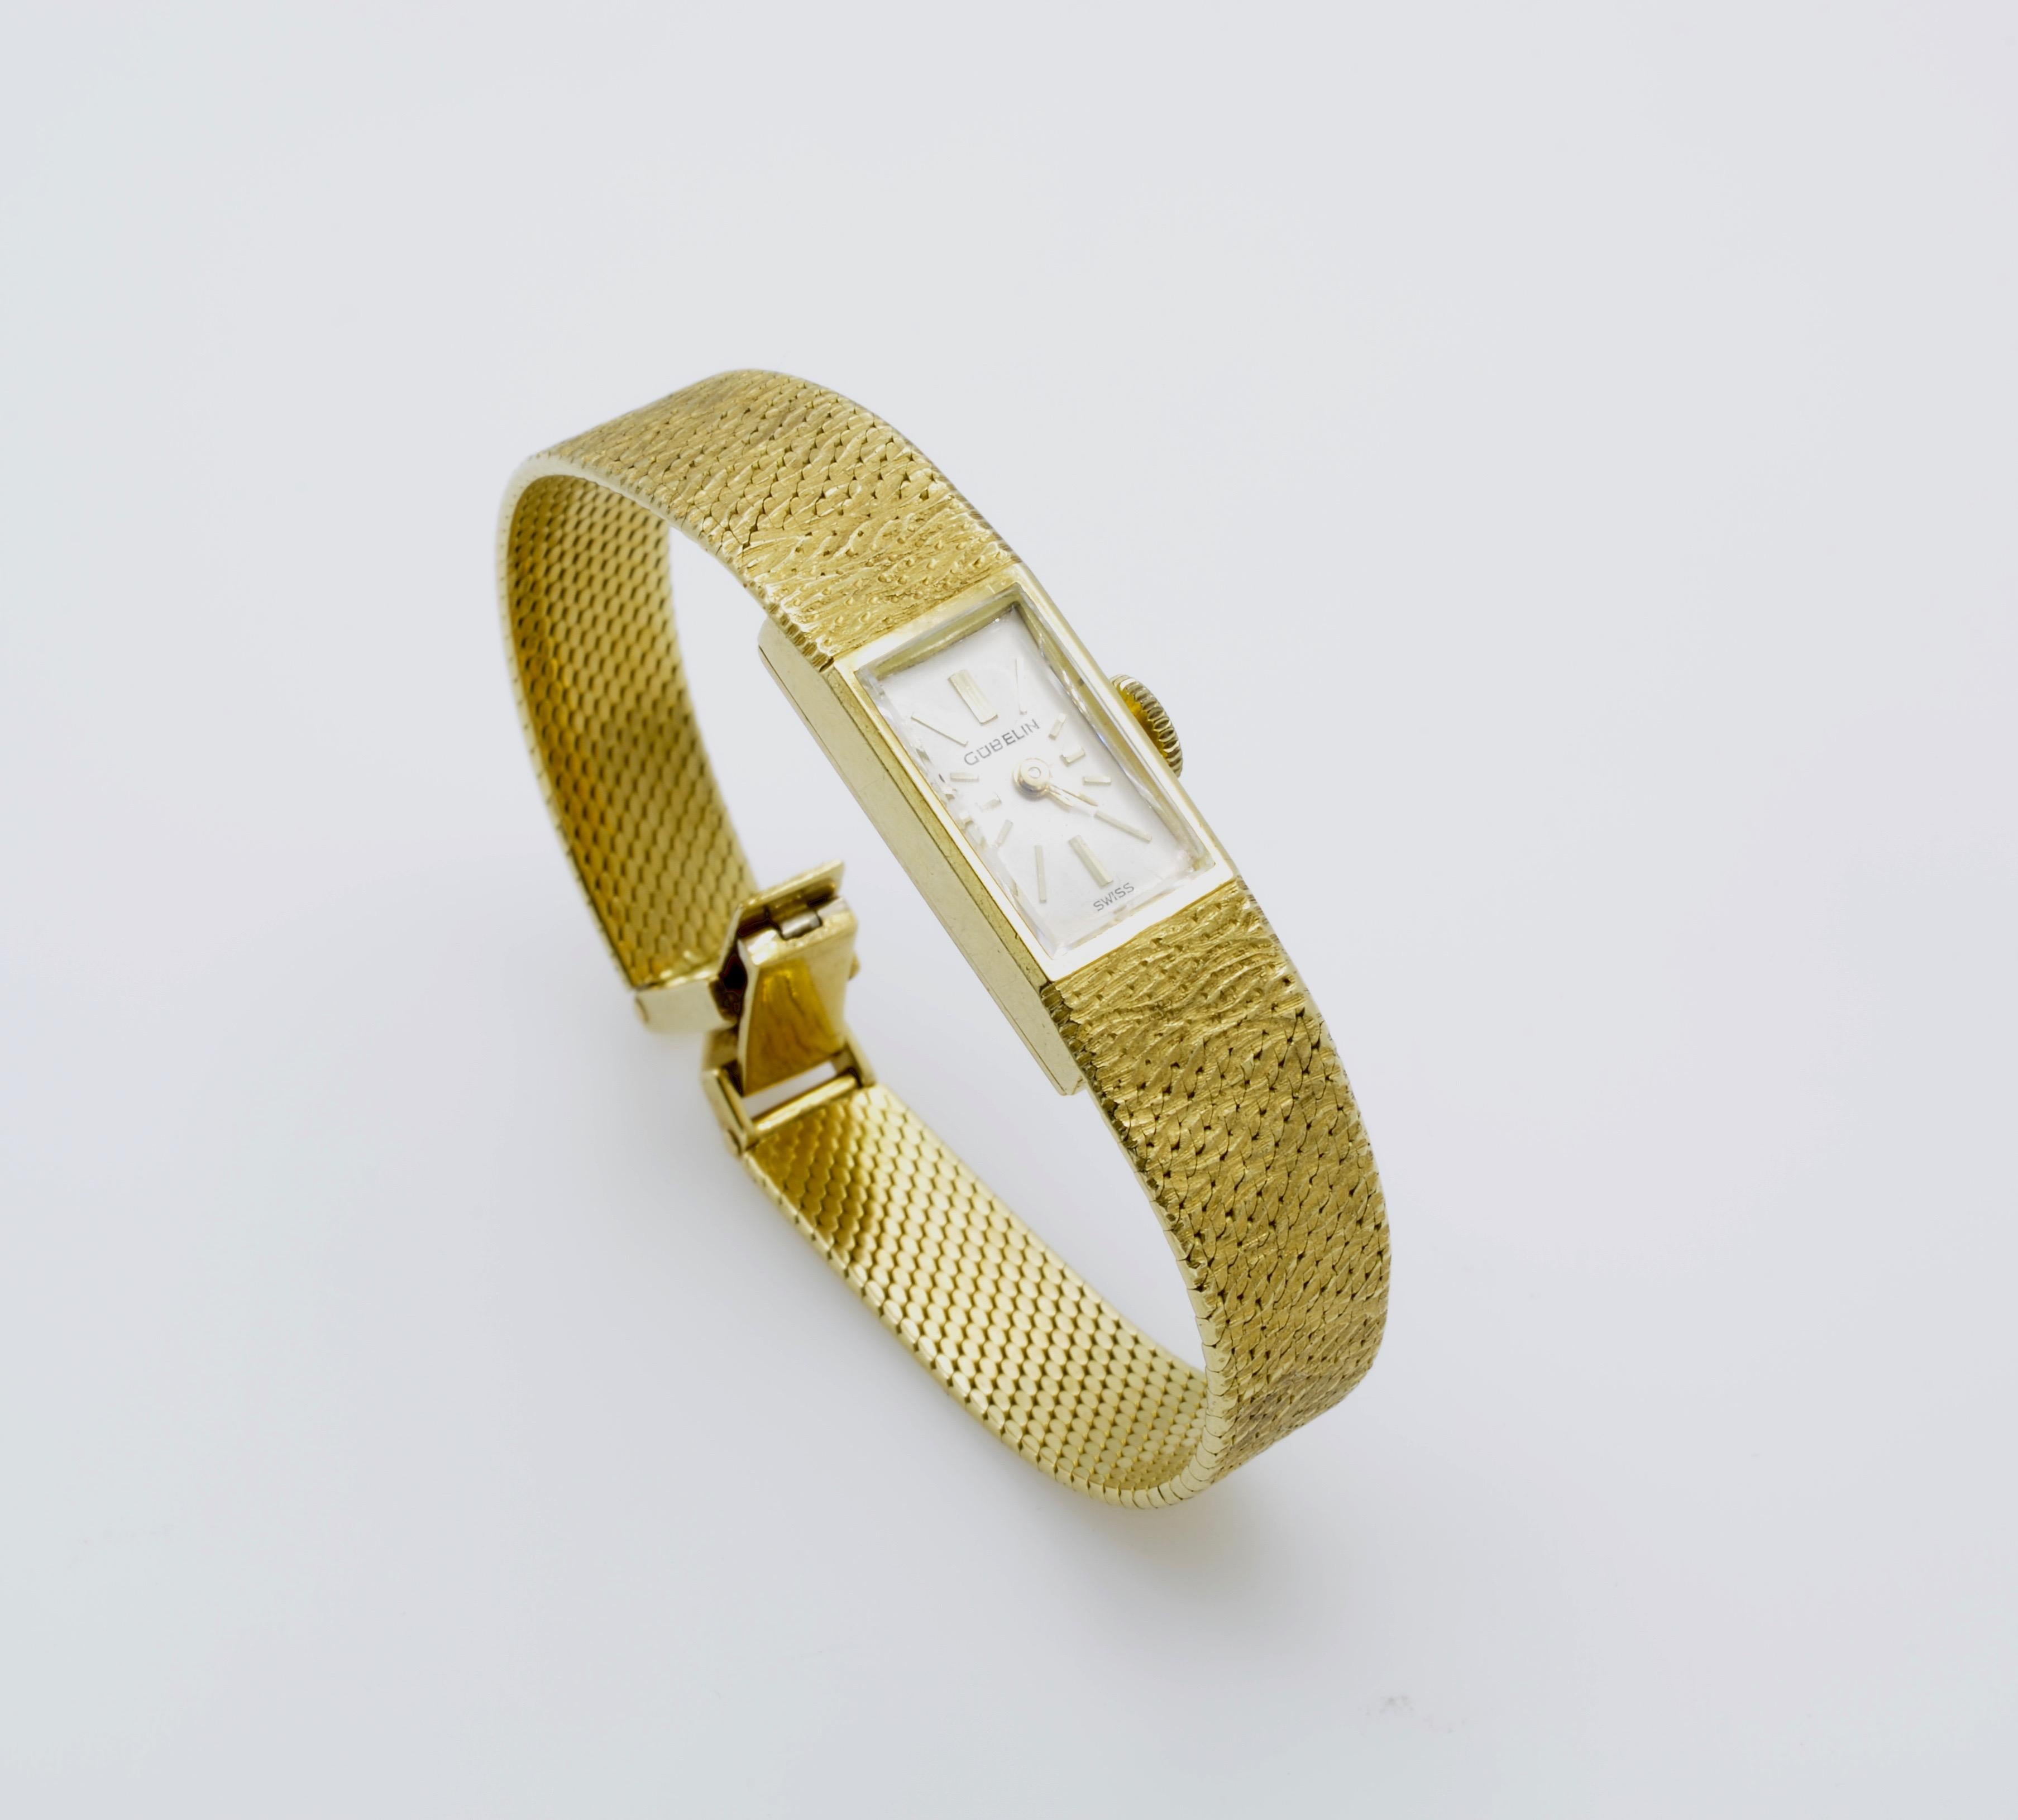 Modern and classic women's gold wrist watch. It has an elegant rectangular dial on a textured gold bracelet, Swiss made and timeless design. The movement is beautiful and works well, it just needs a new arm. It has a nice feeling to wear because of